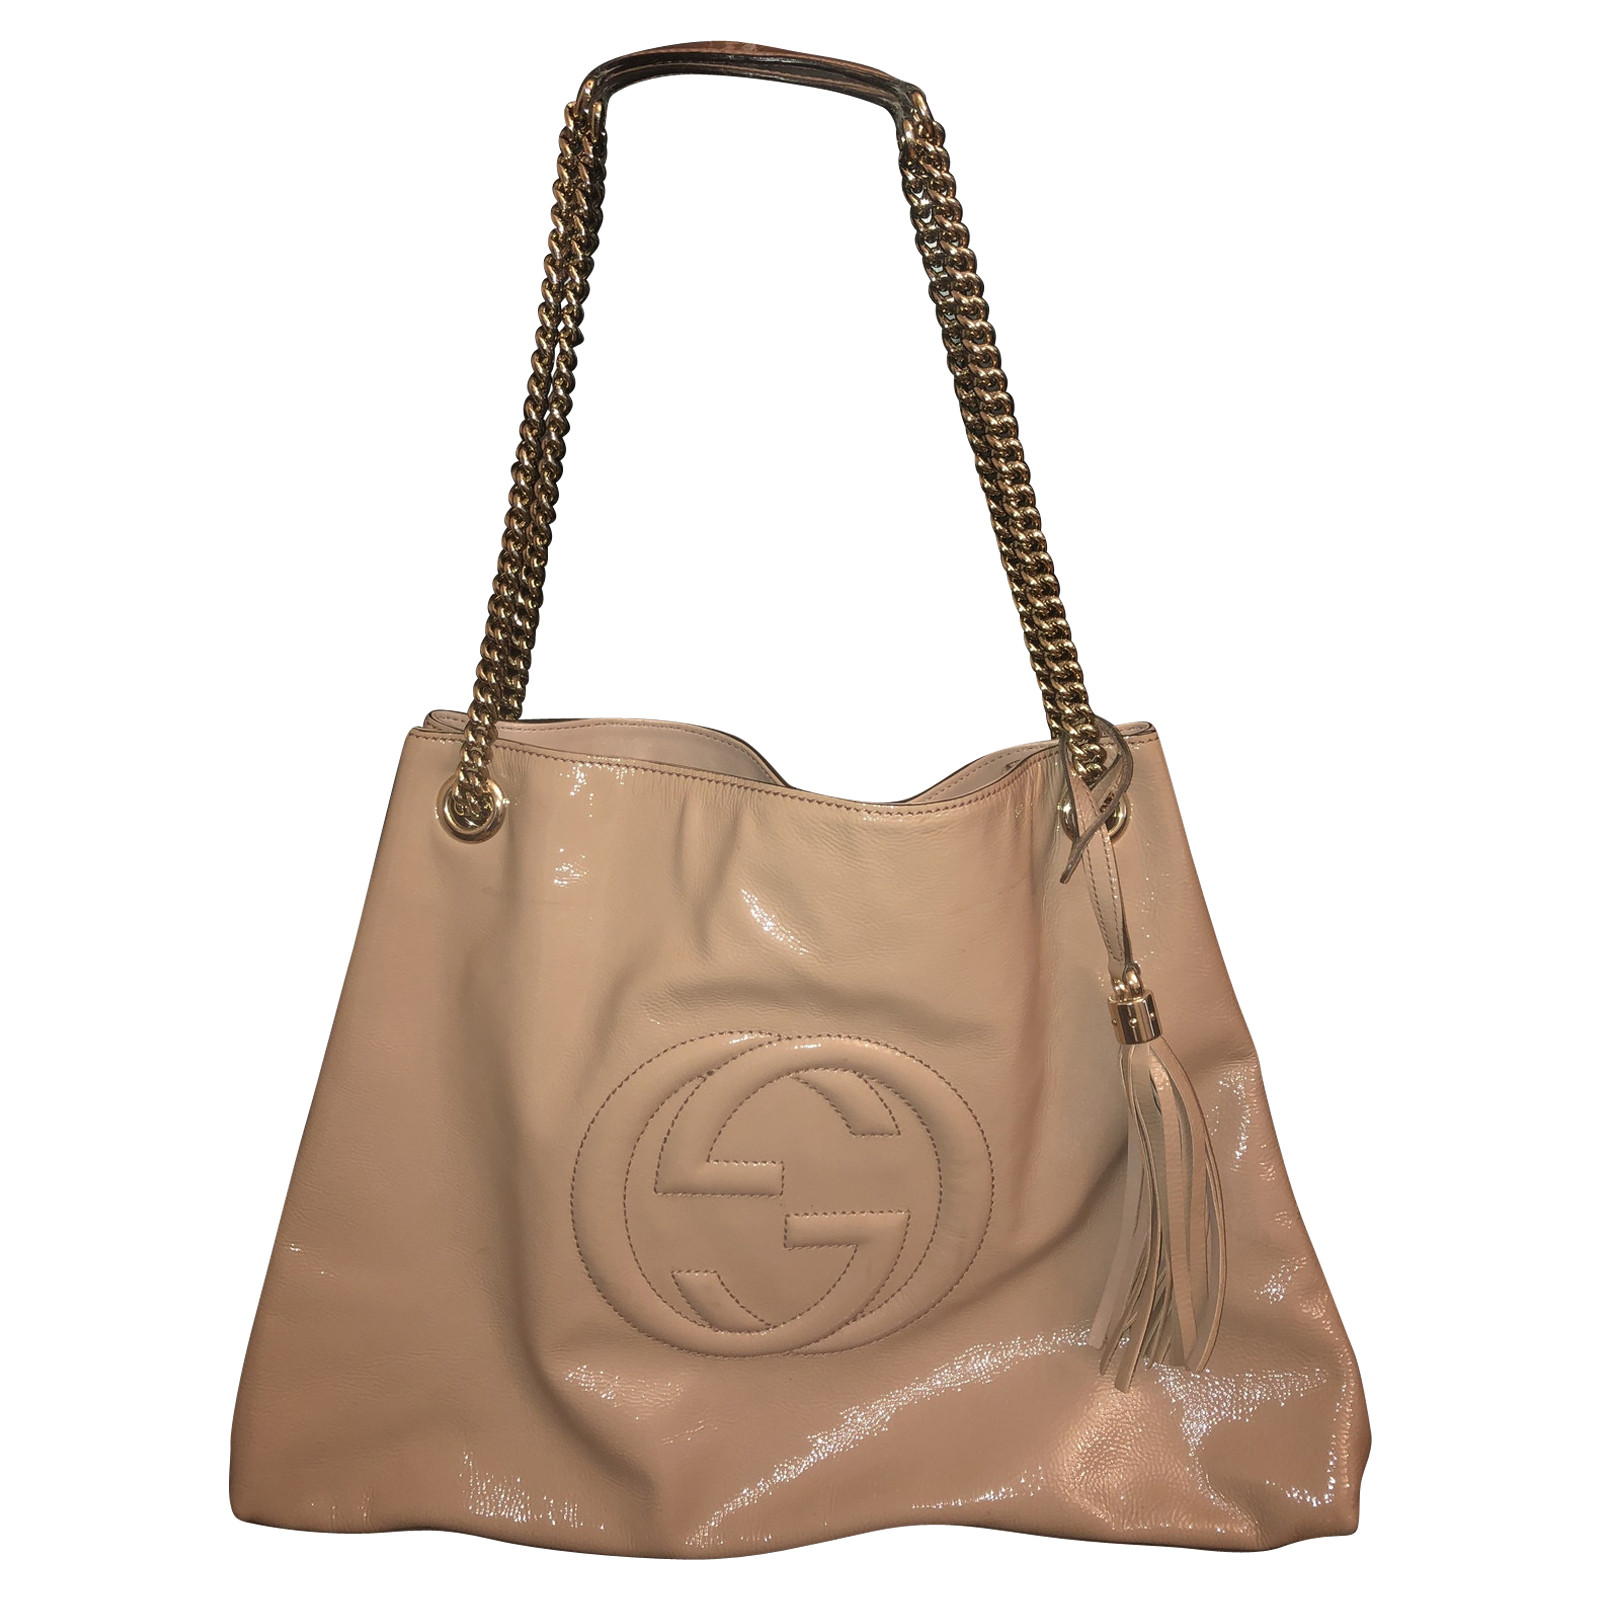 Gucci Soho Tote Bag Patent in Nude - Second Hand Gucci Soho Tote Bag Patent leather in Nude buy used for 850€ (4415583)